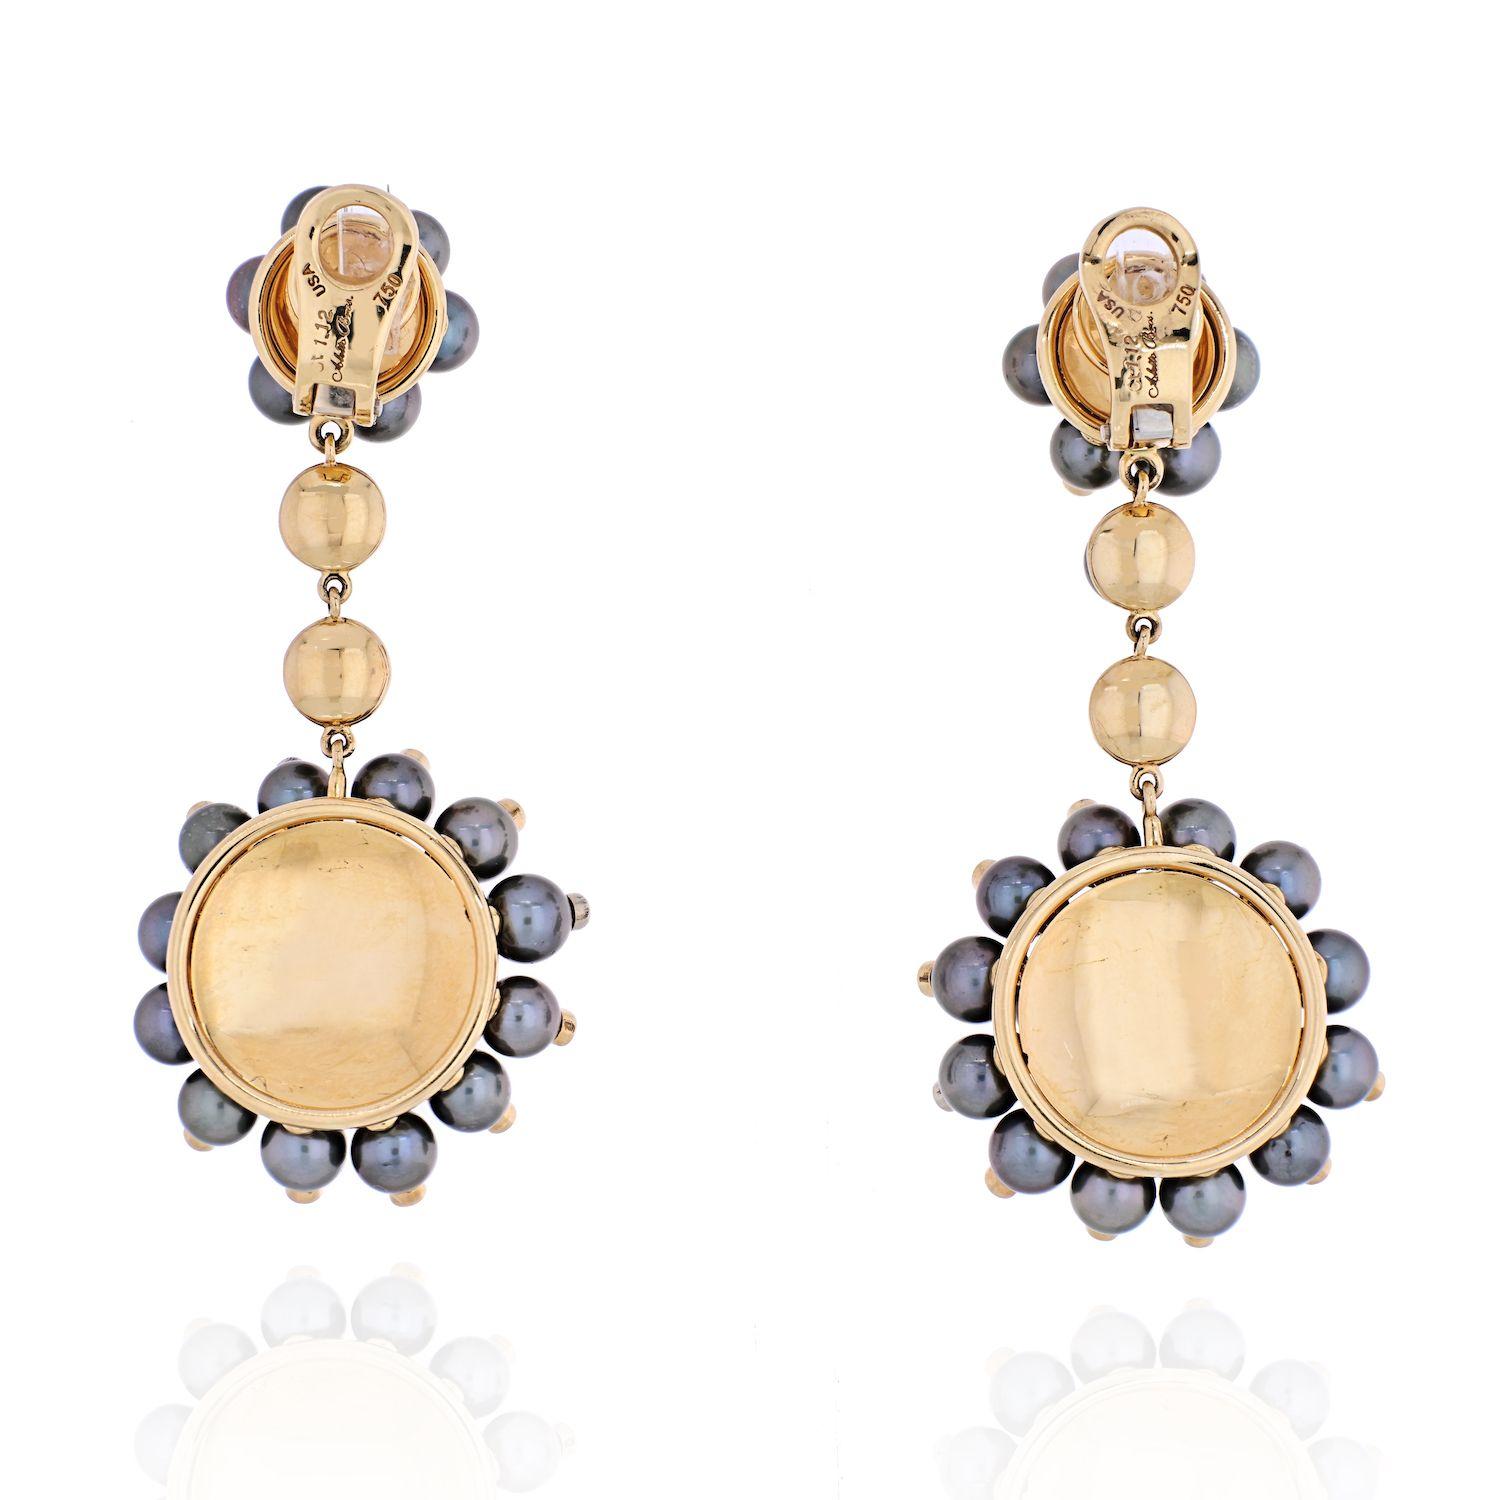 Round Cut Aletto Brothers 18 Karat Yellow Gold Diamond, Cultured Pearl Dangling Earrings